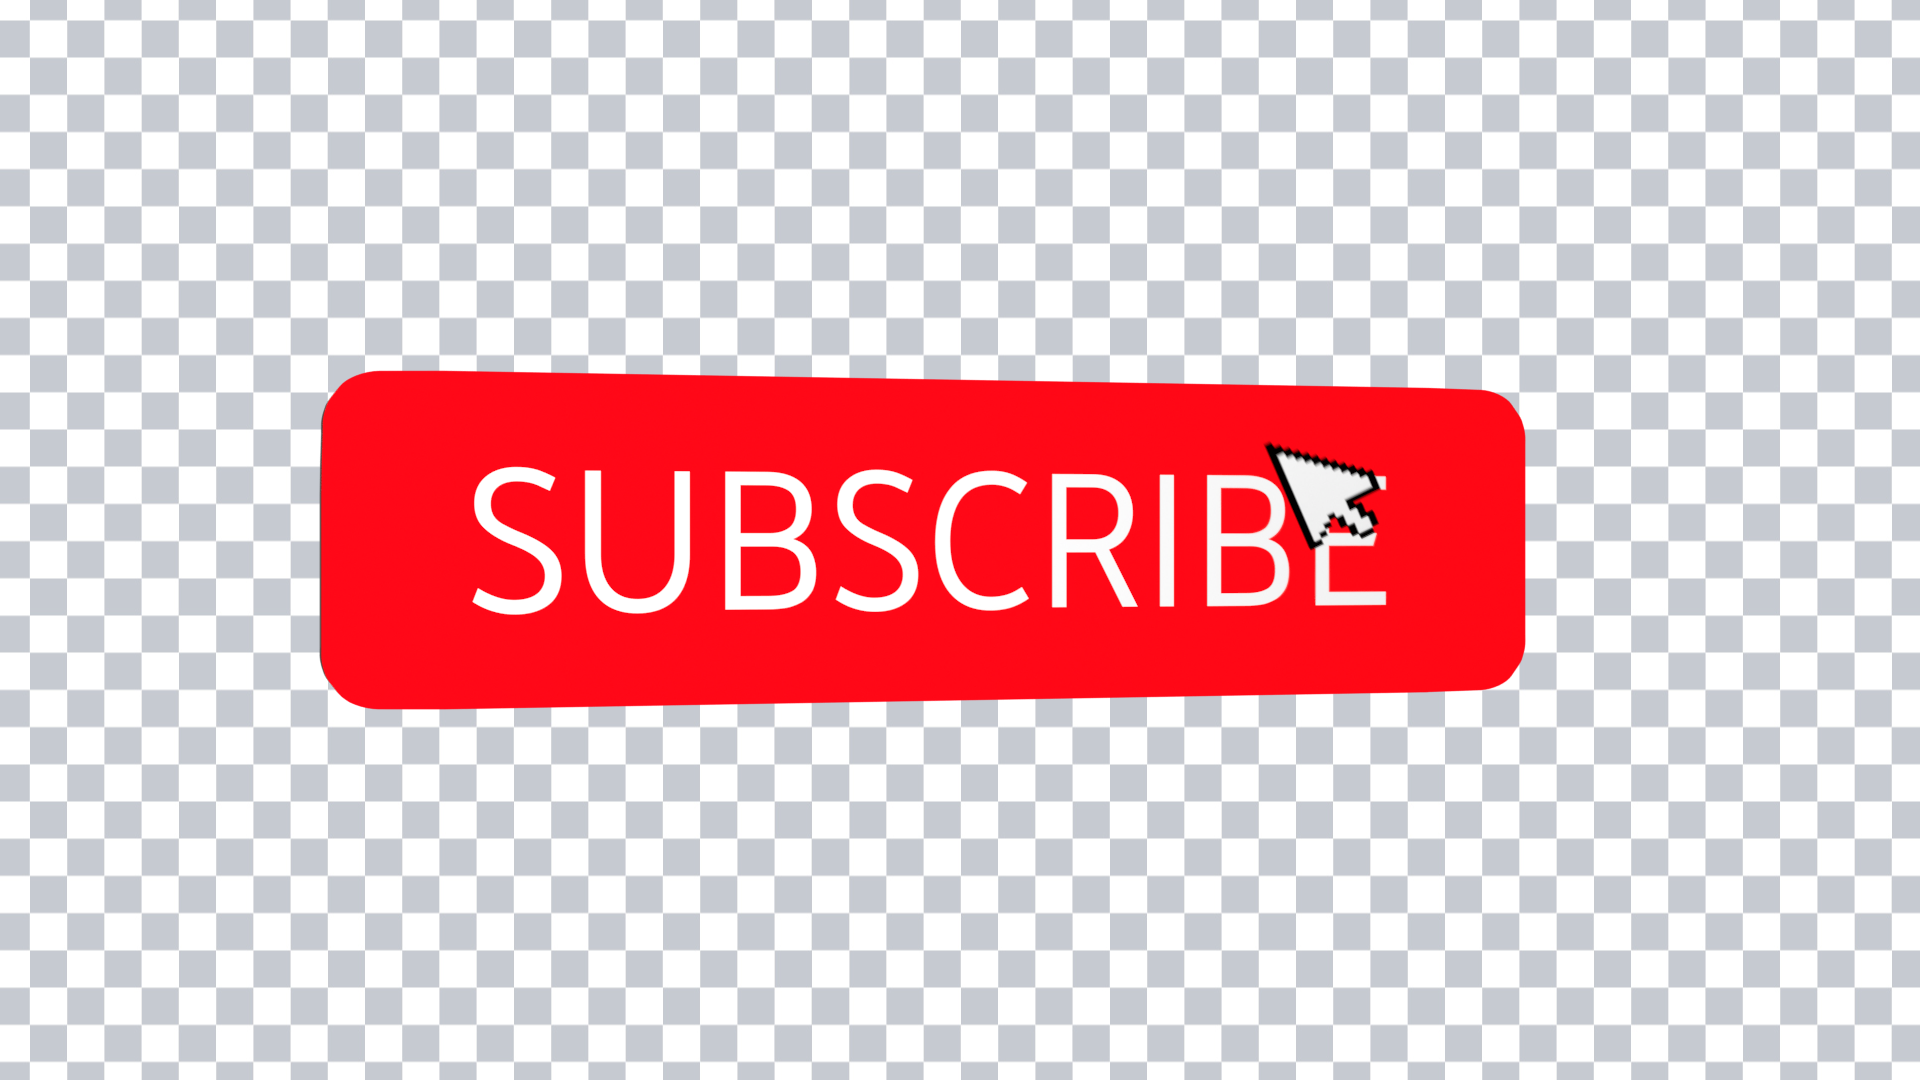 Subscribe Button getting Hit by Mouse Cursor Animation